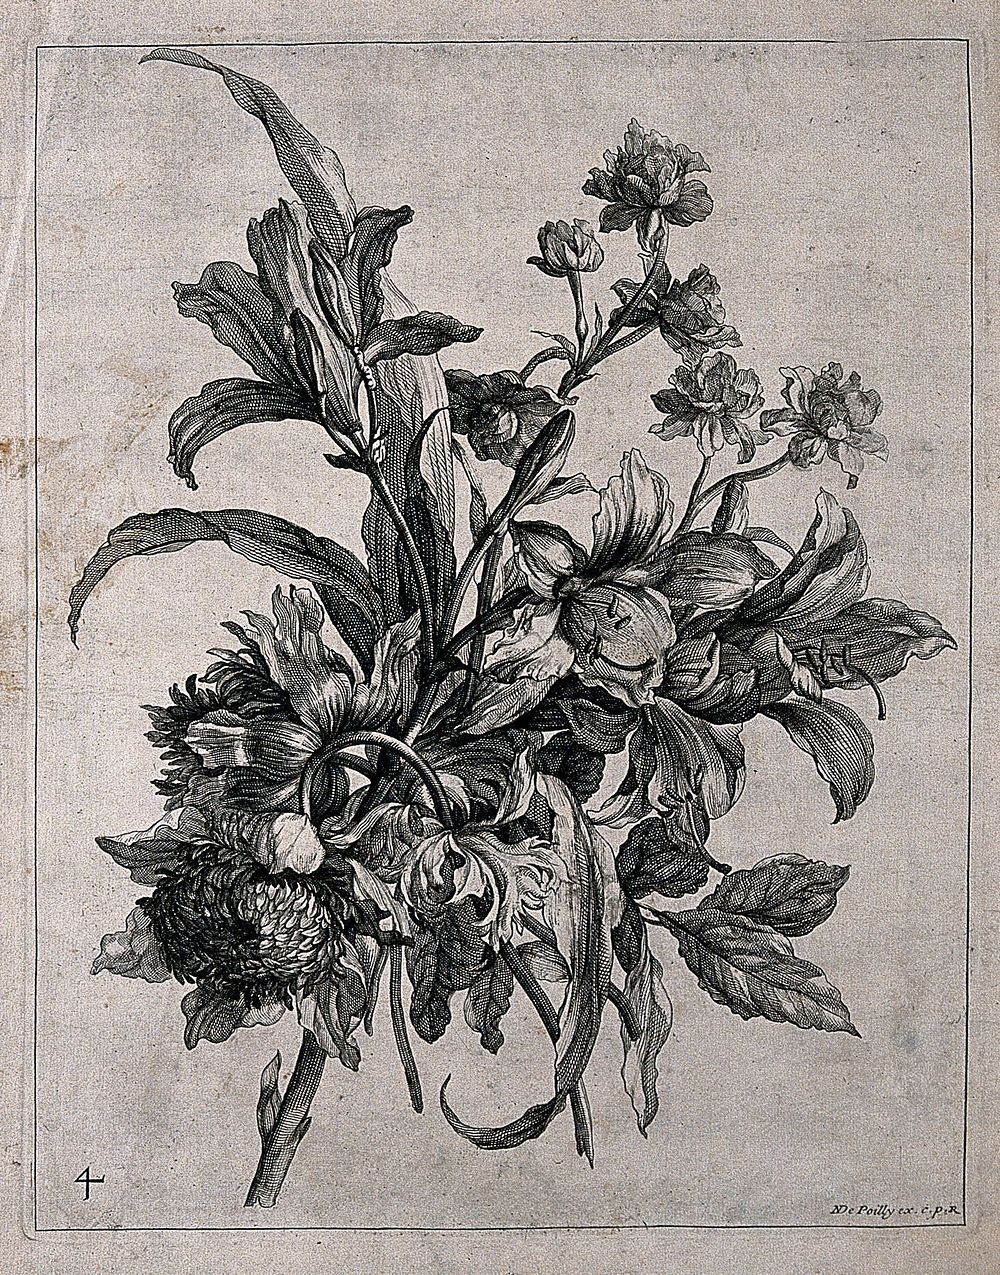 Floral bouquet, with some lilies. Engraving by N. de Poilly, ca.1660, after himself.